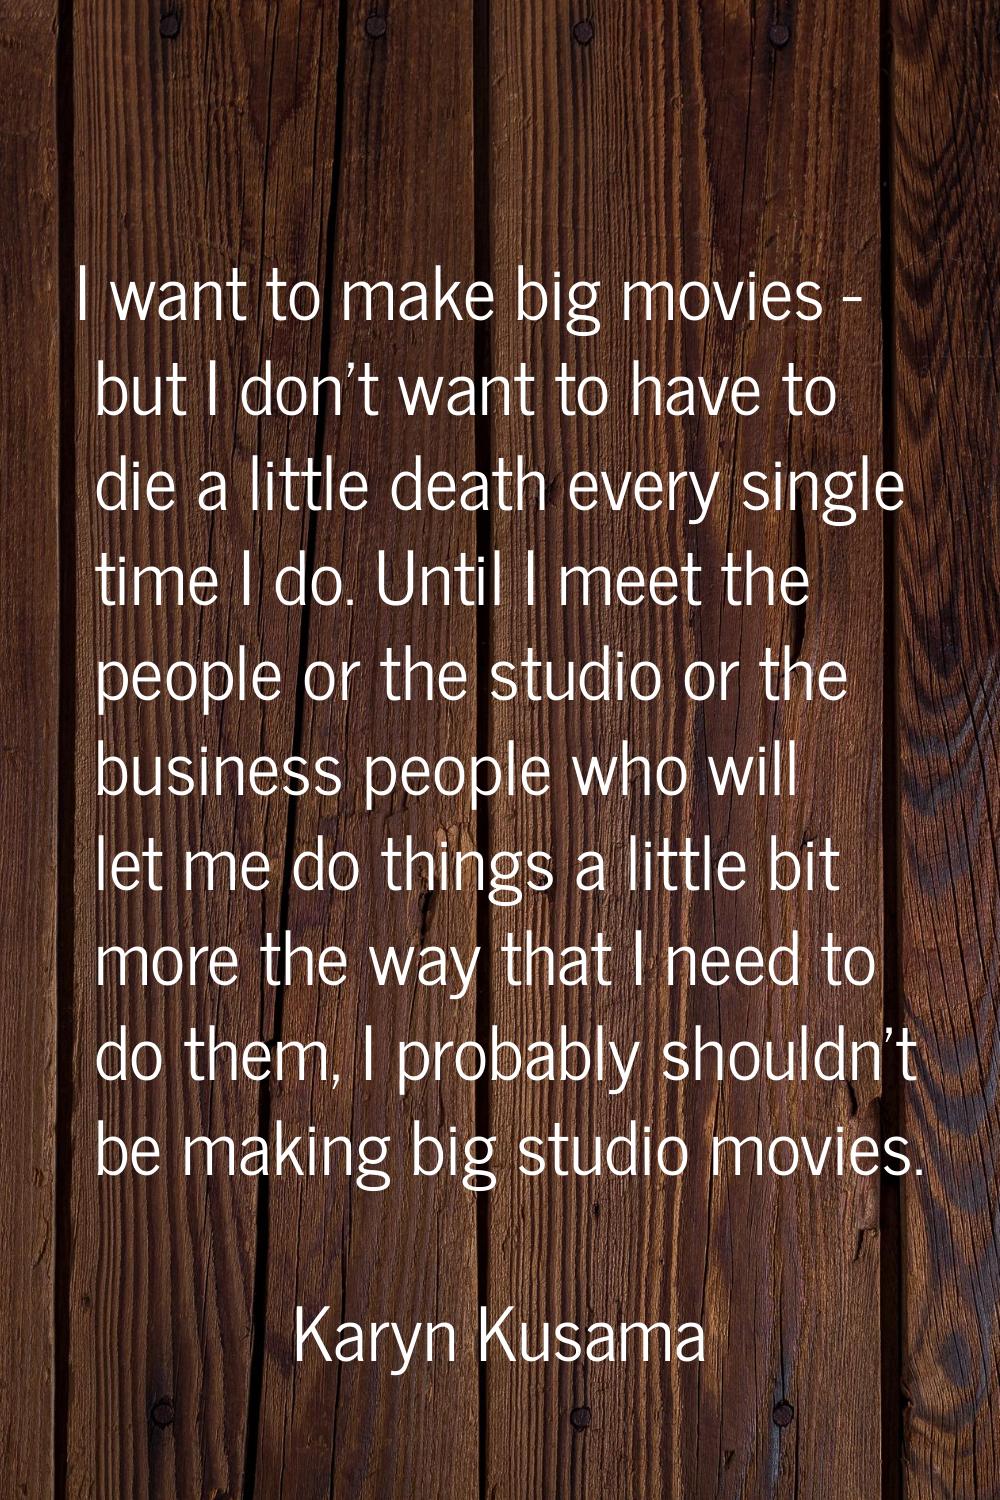 I want to make big movies - but I don't want to have to die a little death every single time I do. 